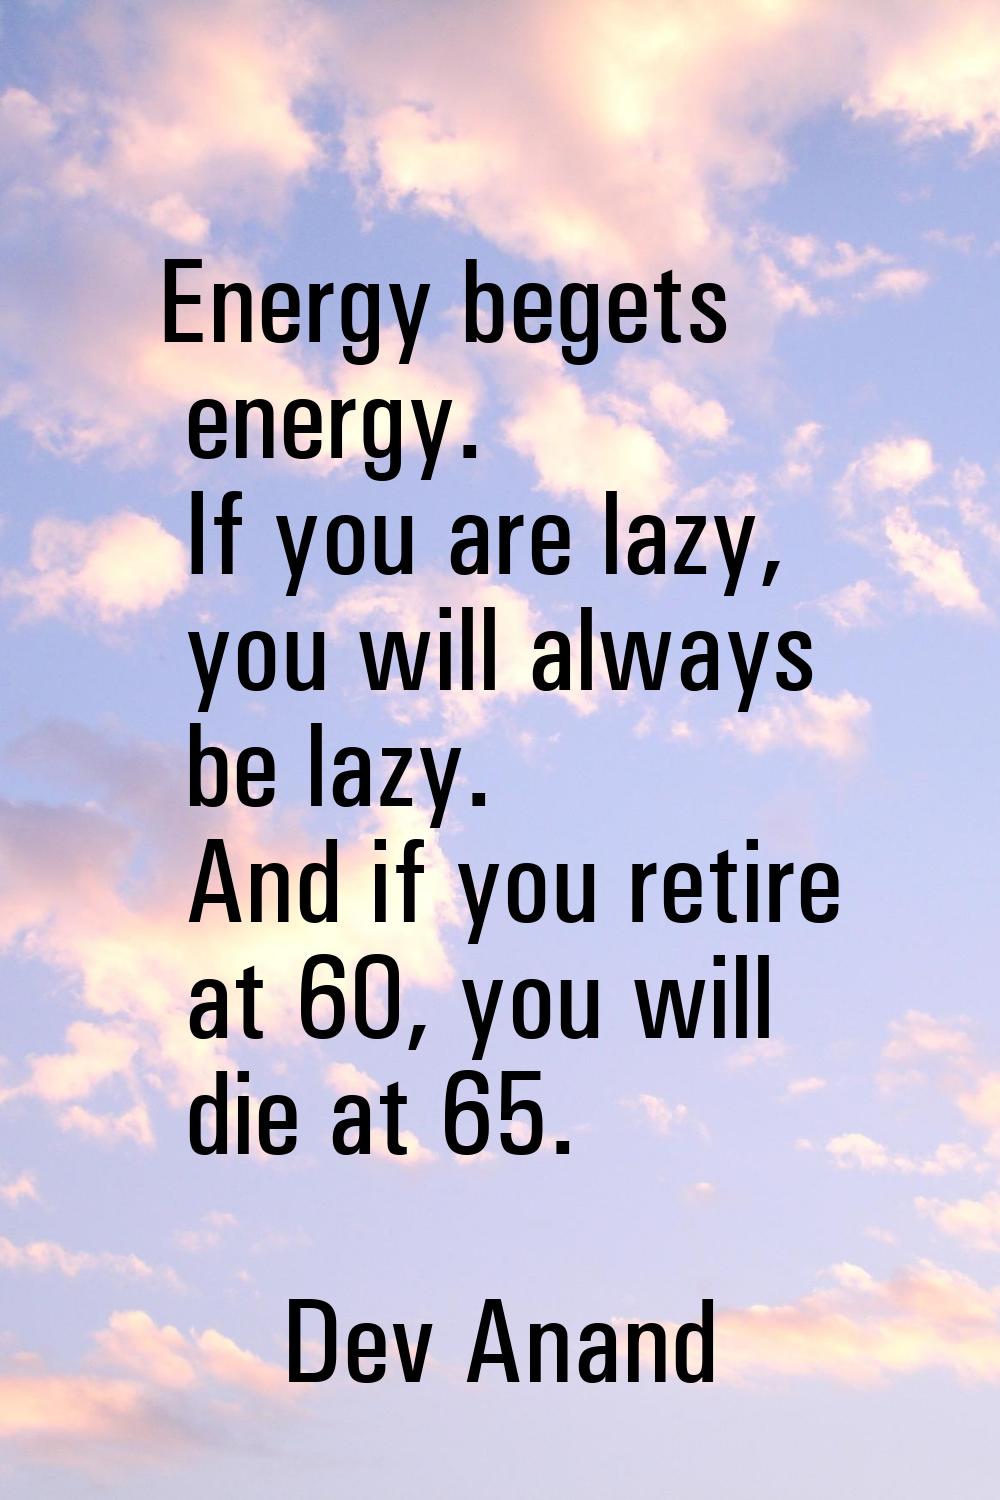 Energy begets energy. If you are lazy, you will always be lazy. And if you retire at 60, you will d